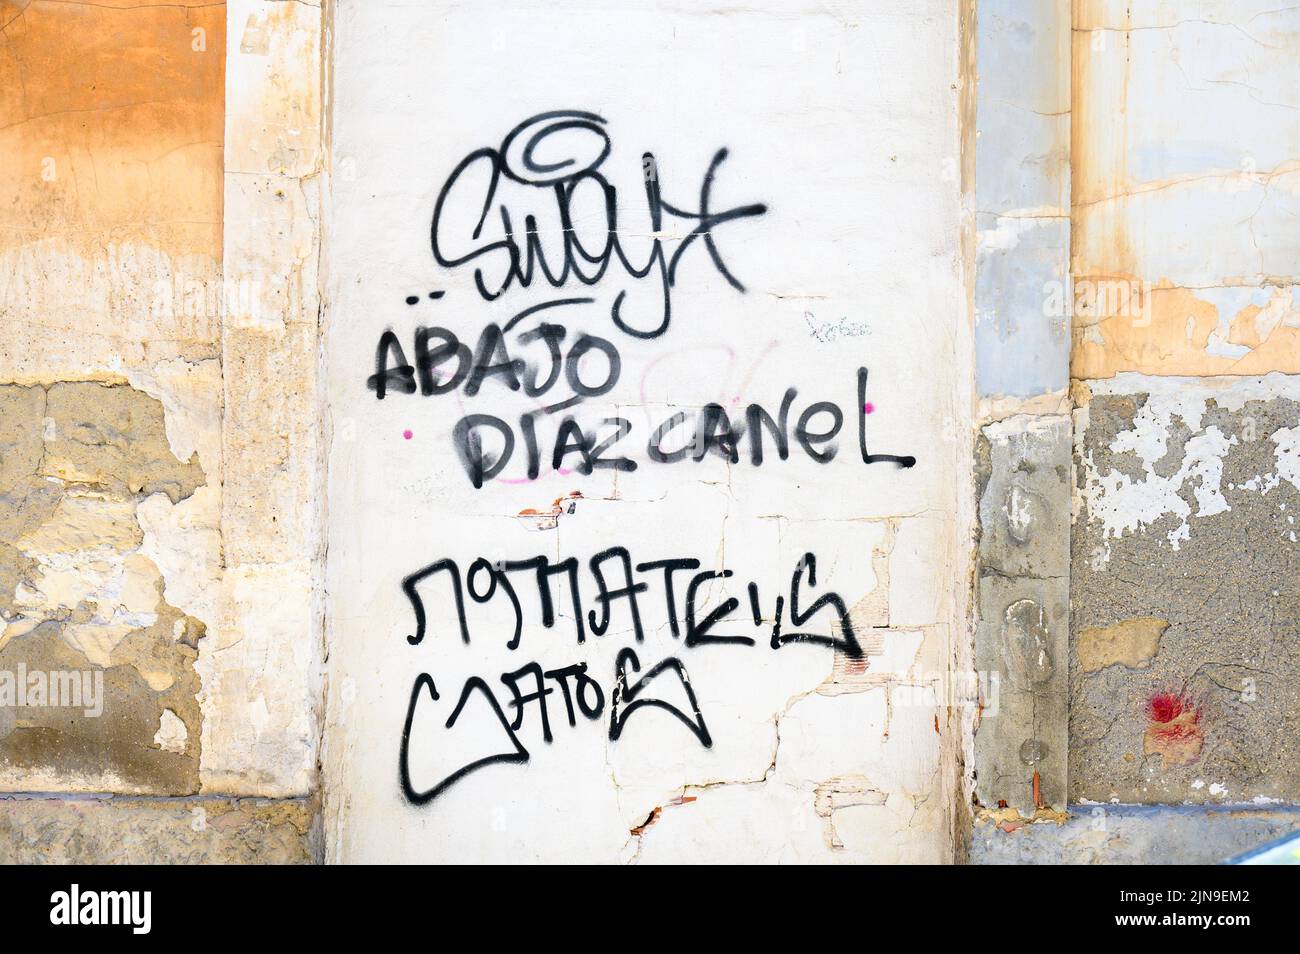 An urban graffiti reading 'Abajo Diaz-Canel'. The political text is painted in a wall in the Spanish city. Stock Photo